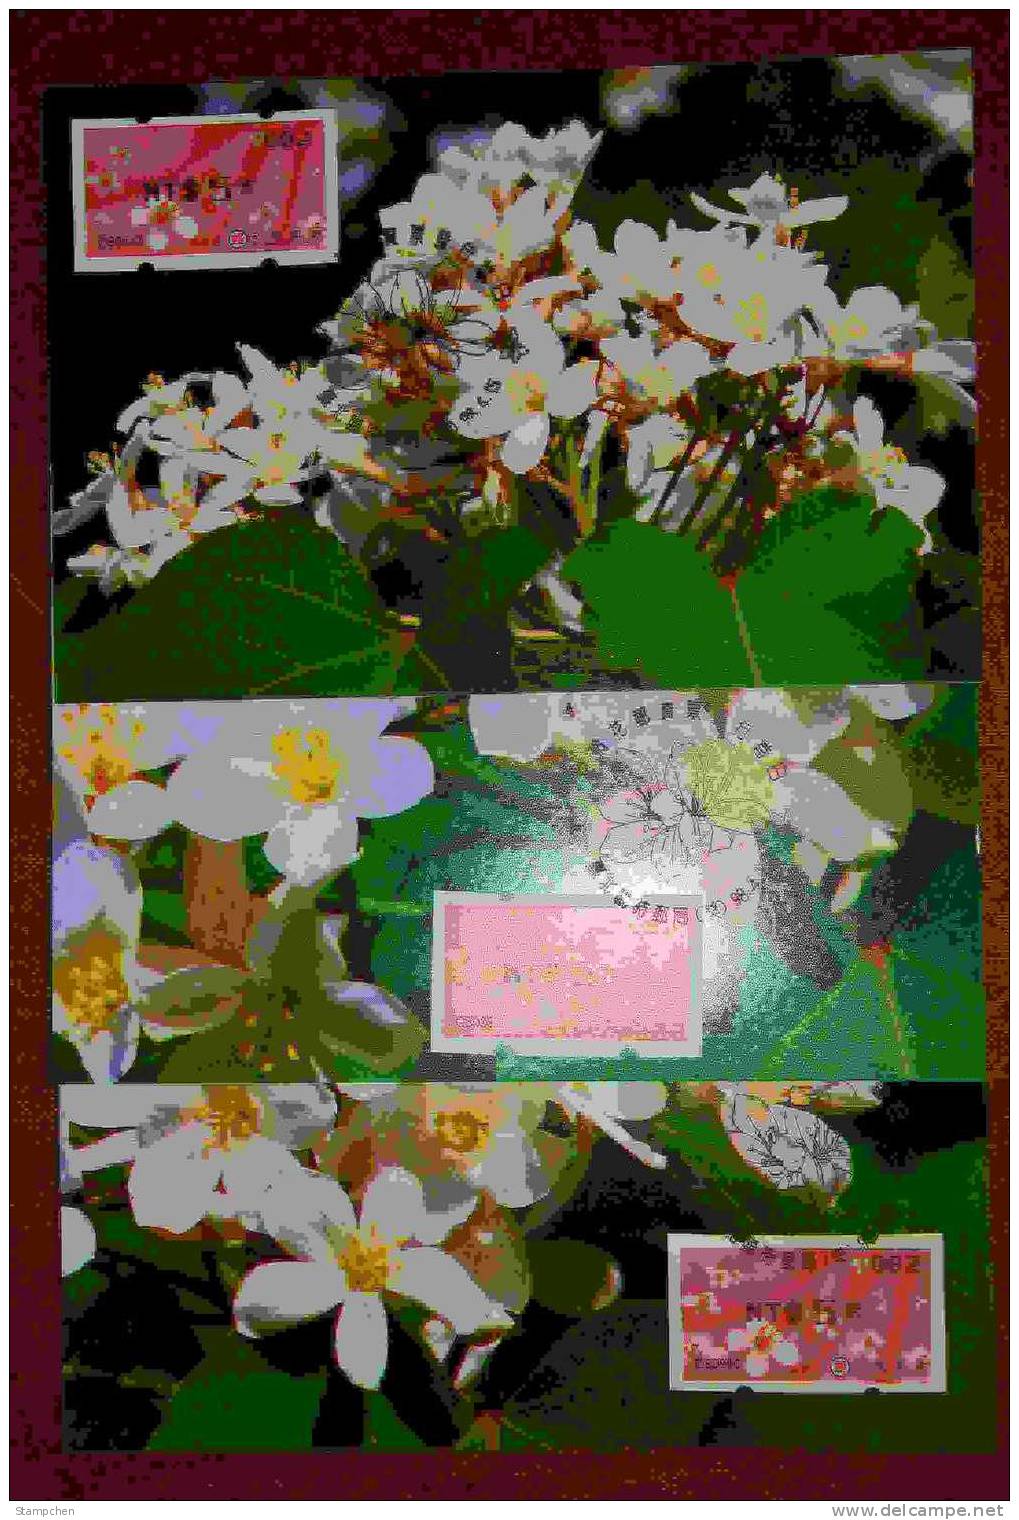 3 Maxi Cards Taiwan 2009 ATM Frama Stamp- 2nd Blossoms Of Tung Tree - Black Imprint - Flower (B) - Maximum Cards